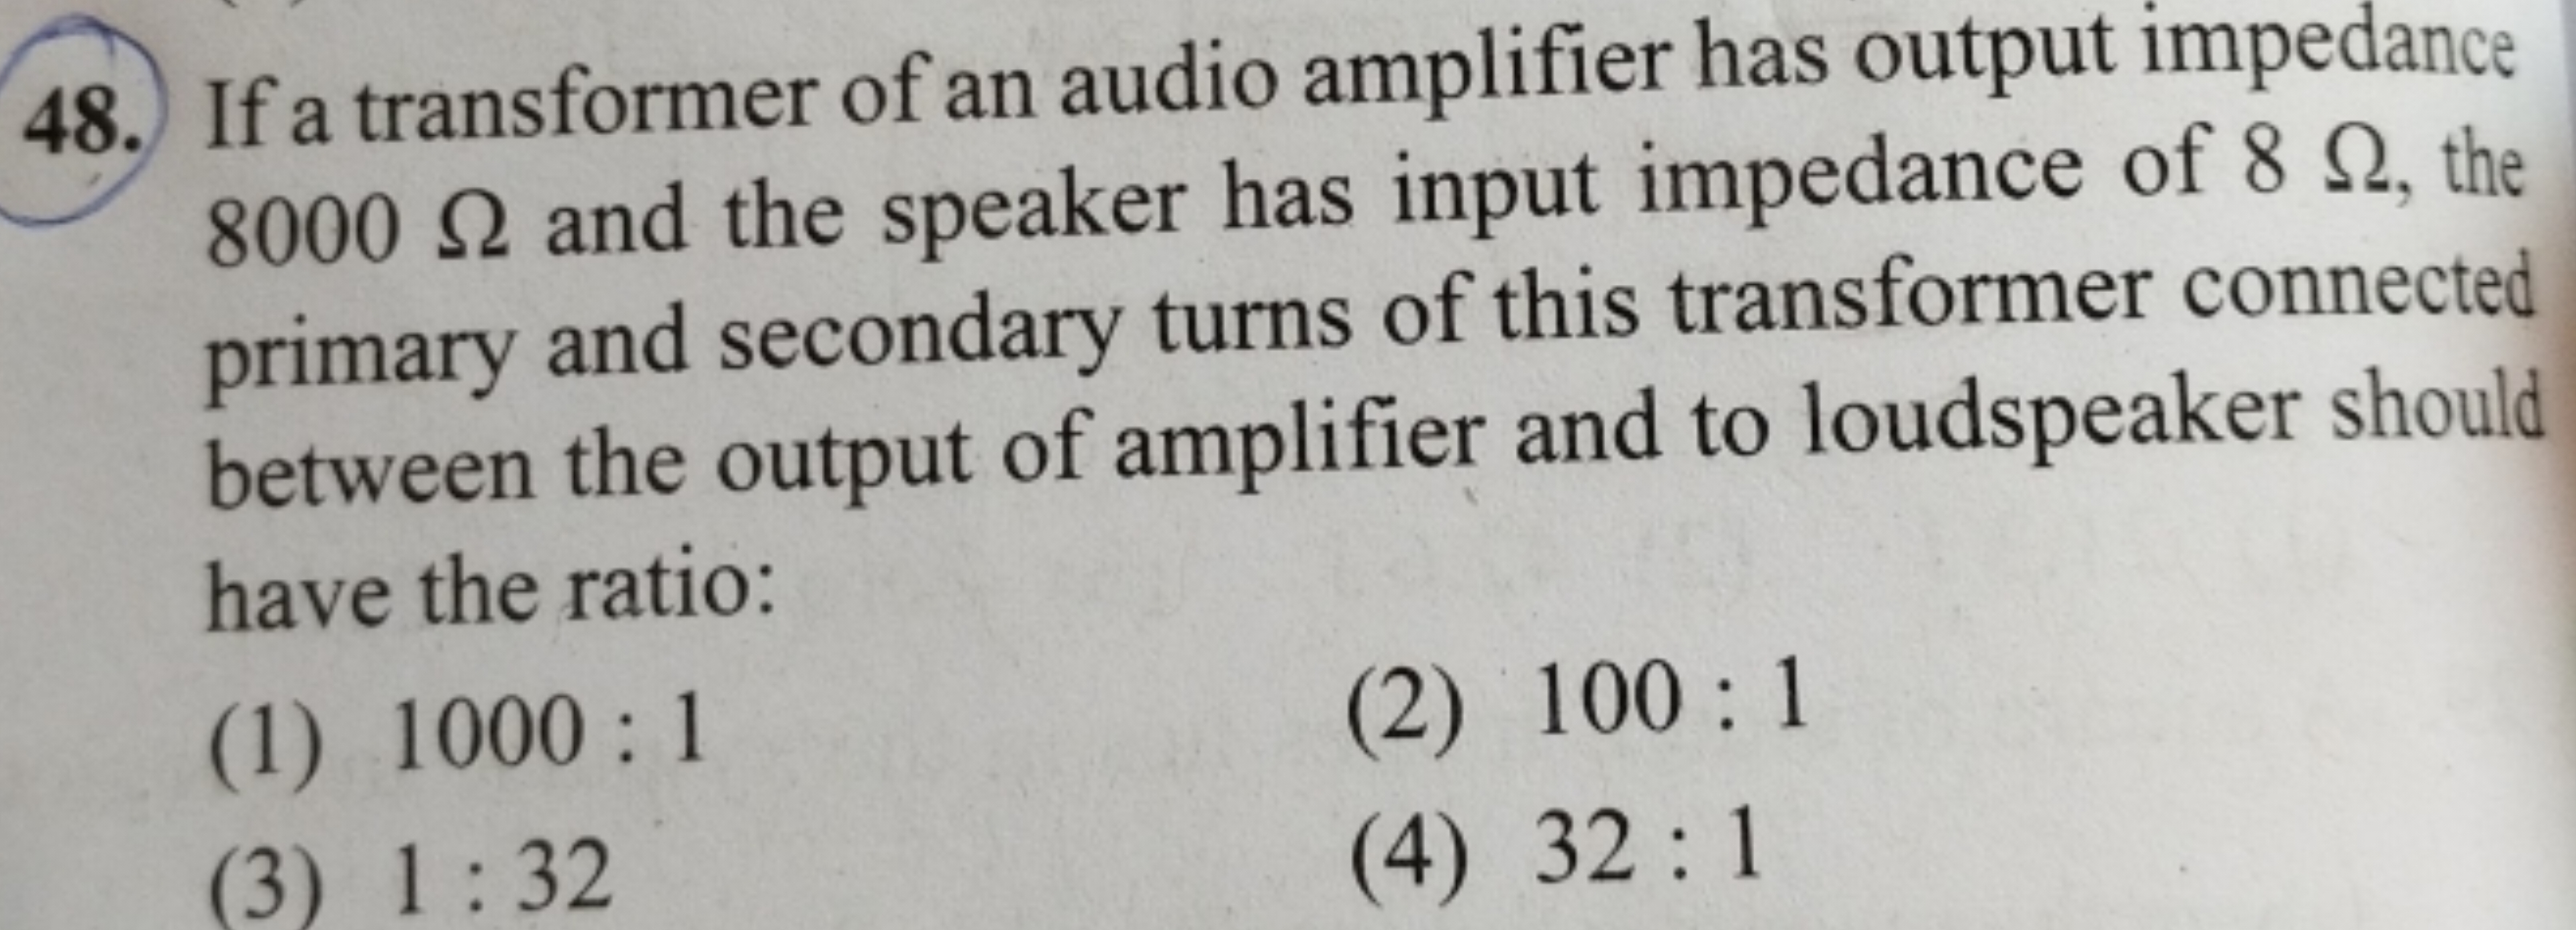 If a transformer of an audio amplifier has output impedance 8000Ω and 